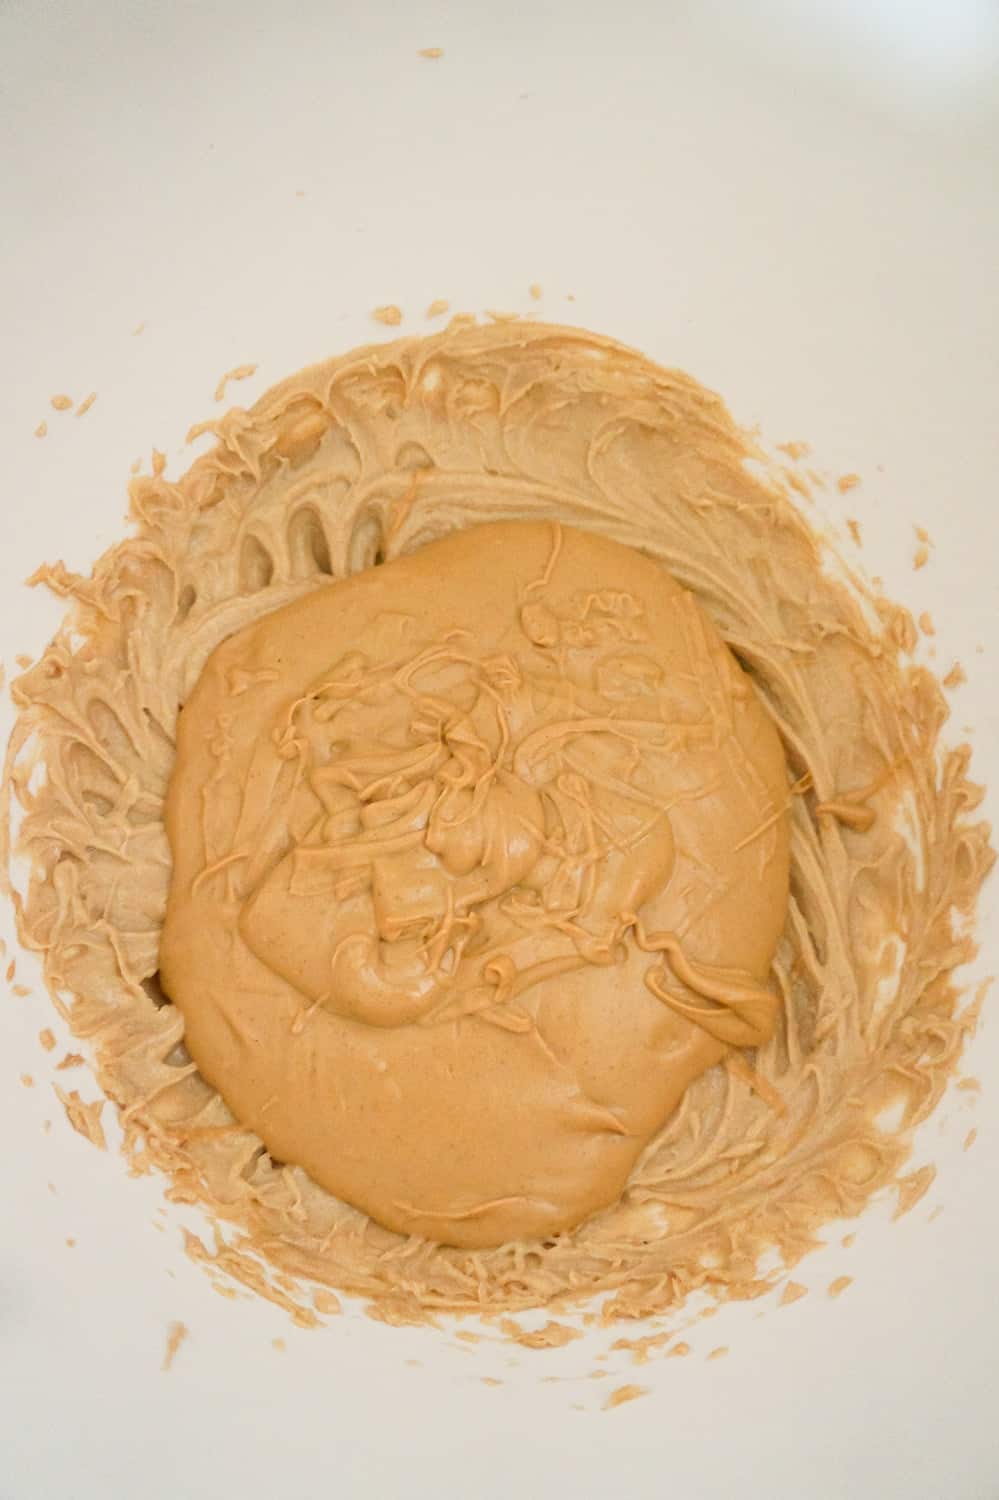 melted peanut butter baking chips on top of peanut butter mixture in a mixing bowl